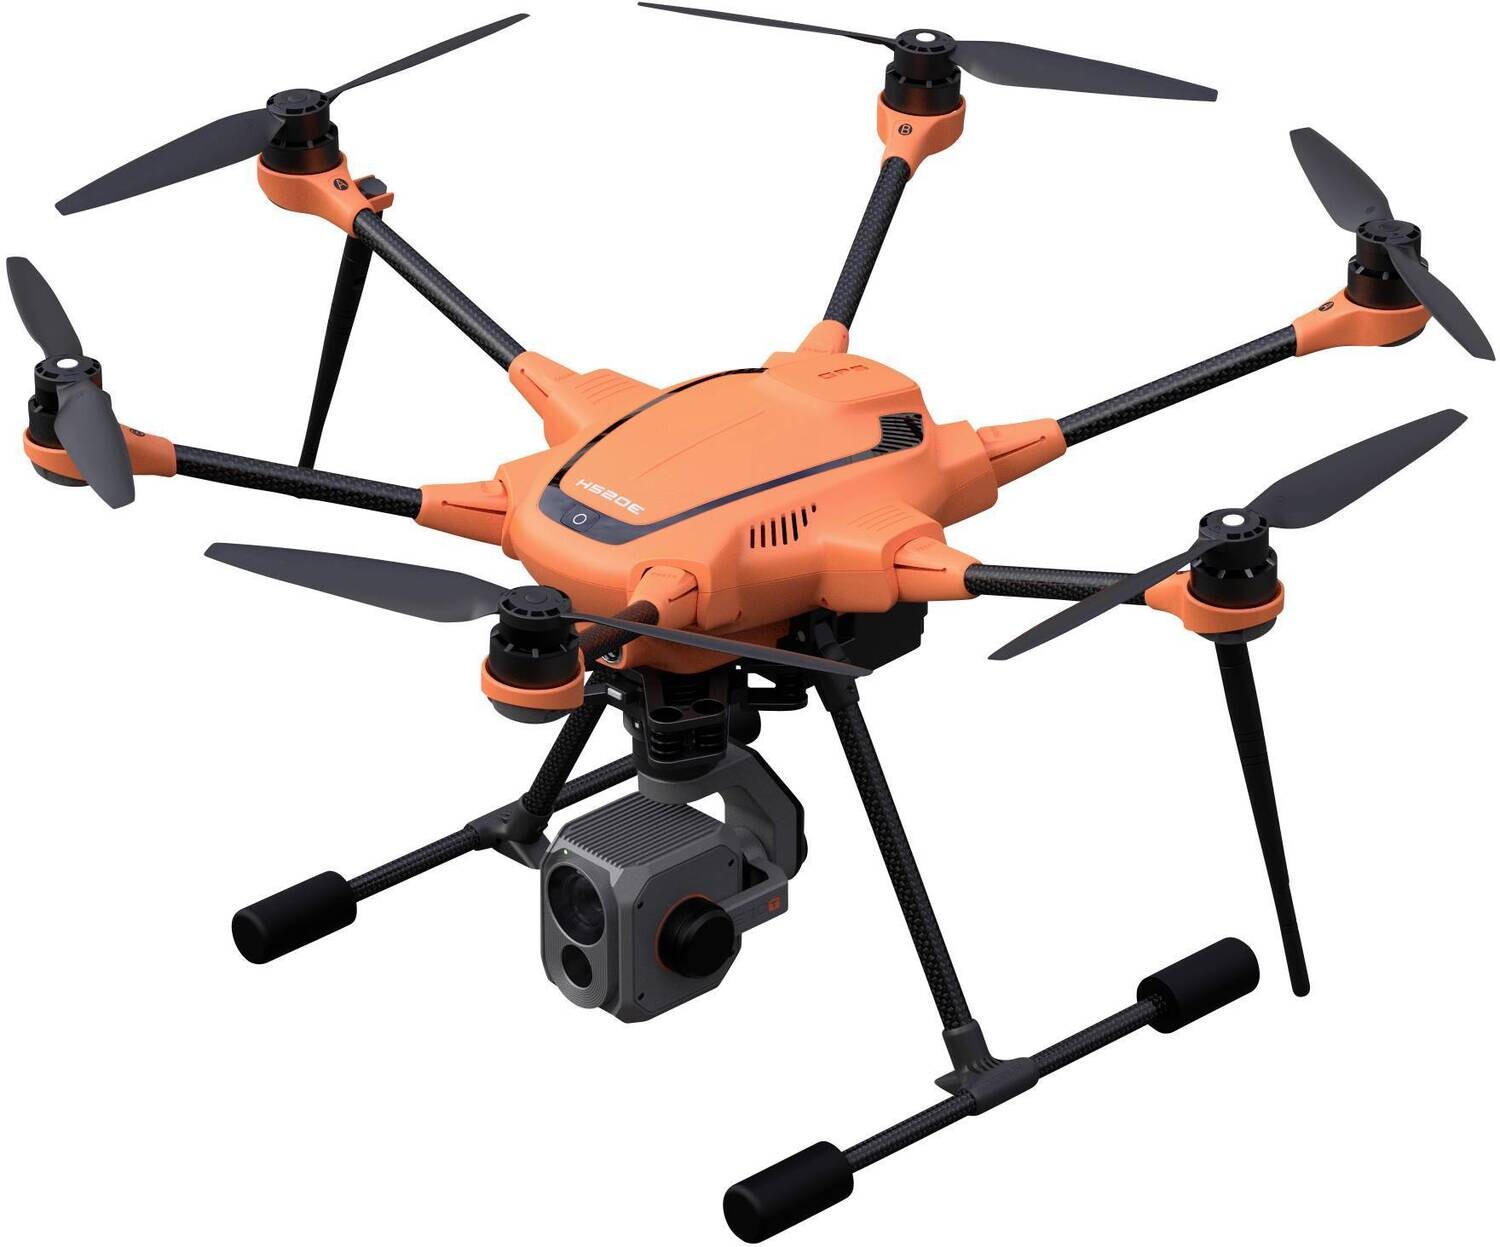 Carevas Professional Release and Drop Device Compatible with DJI